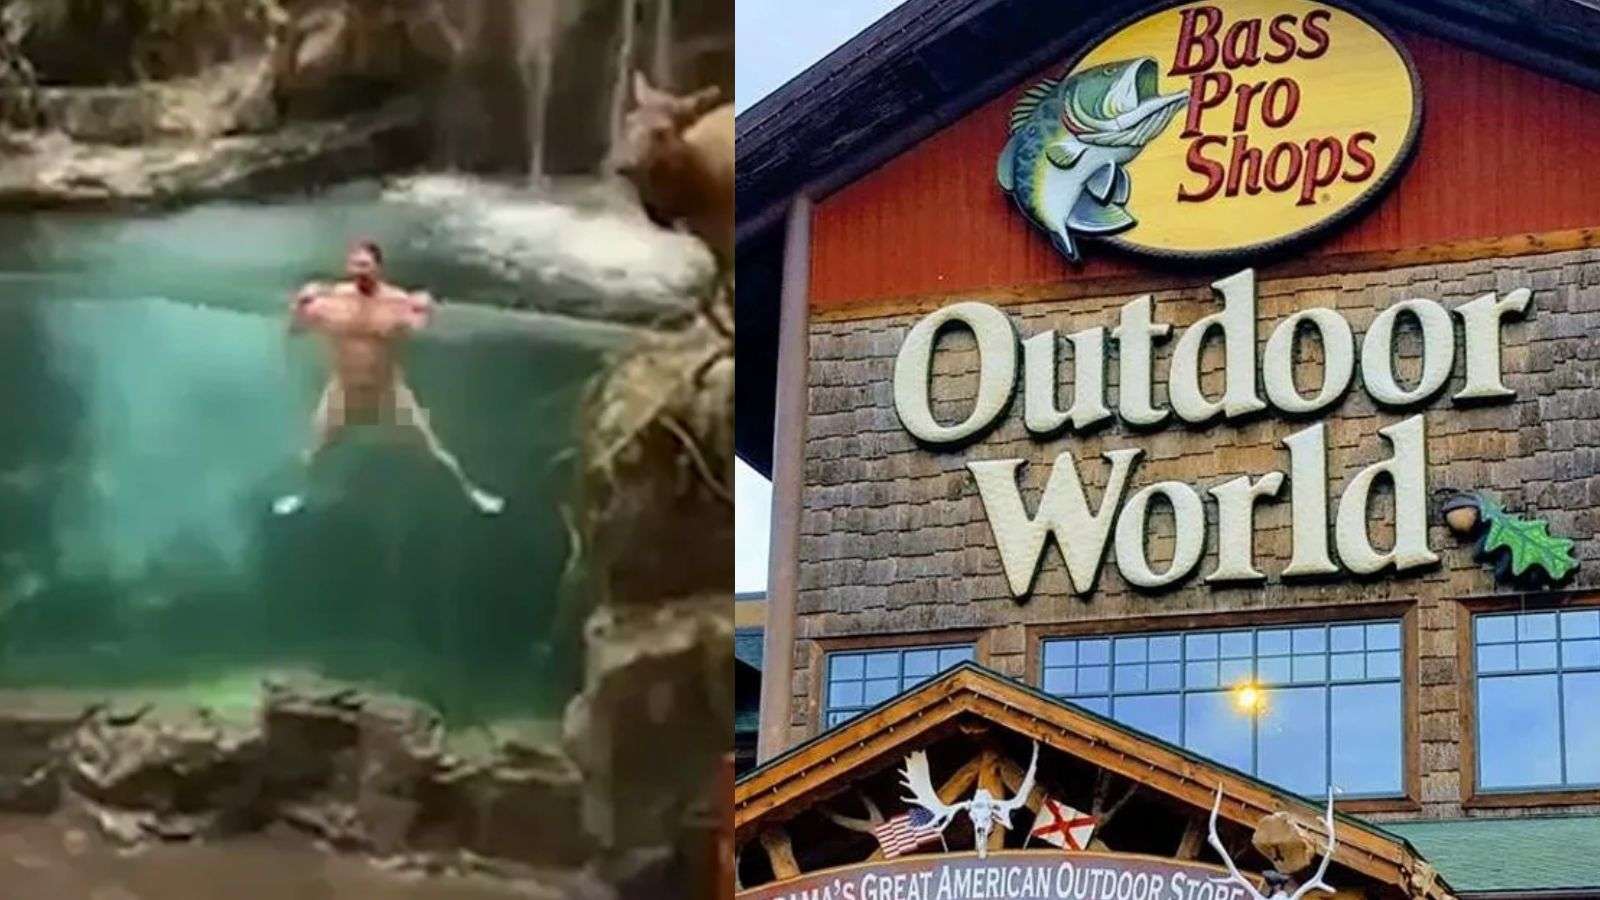 Man jumps named into Bass Pro shop pond